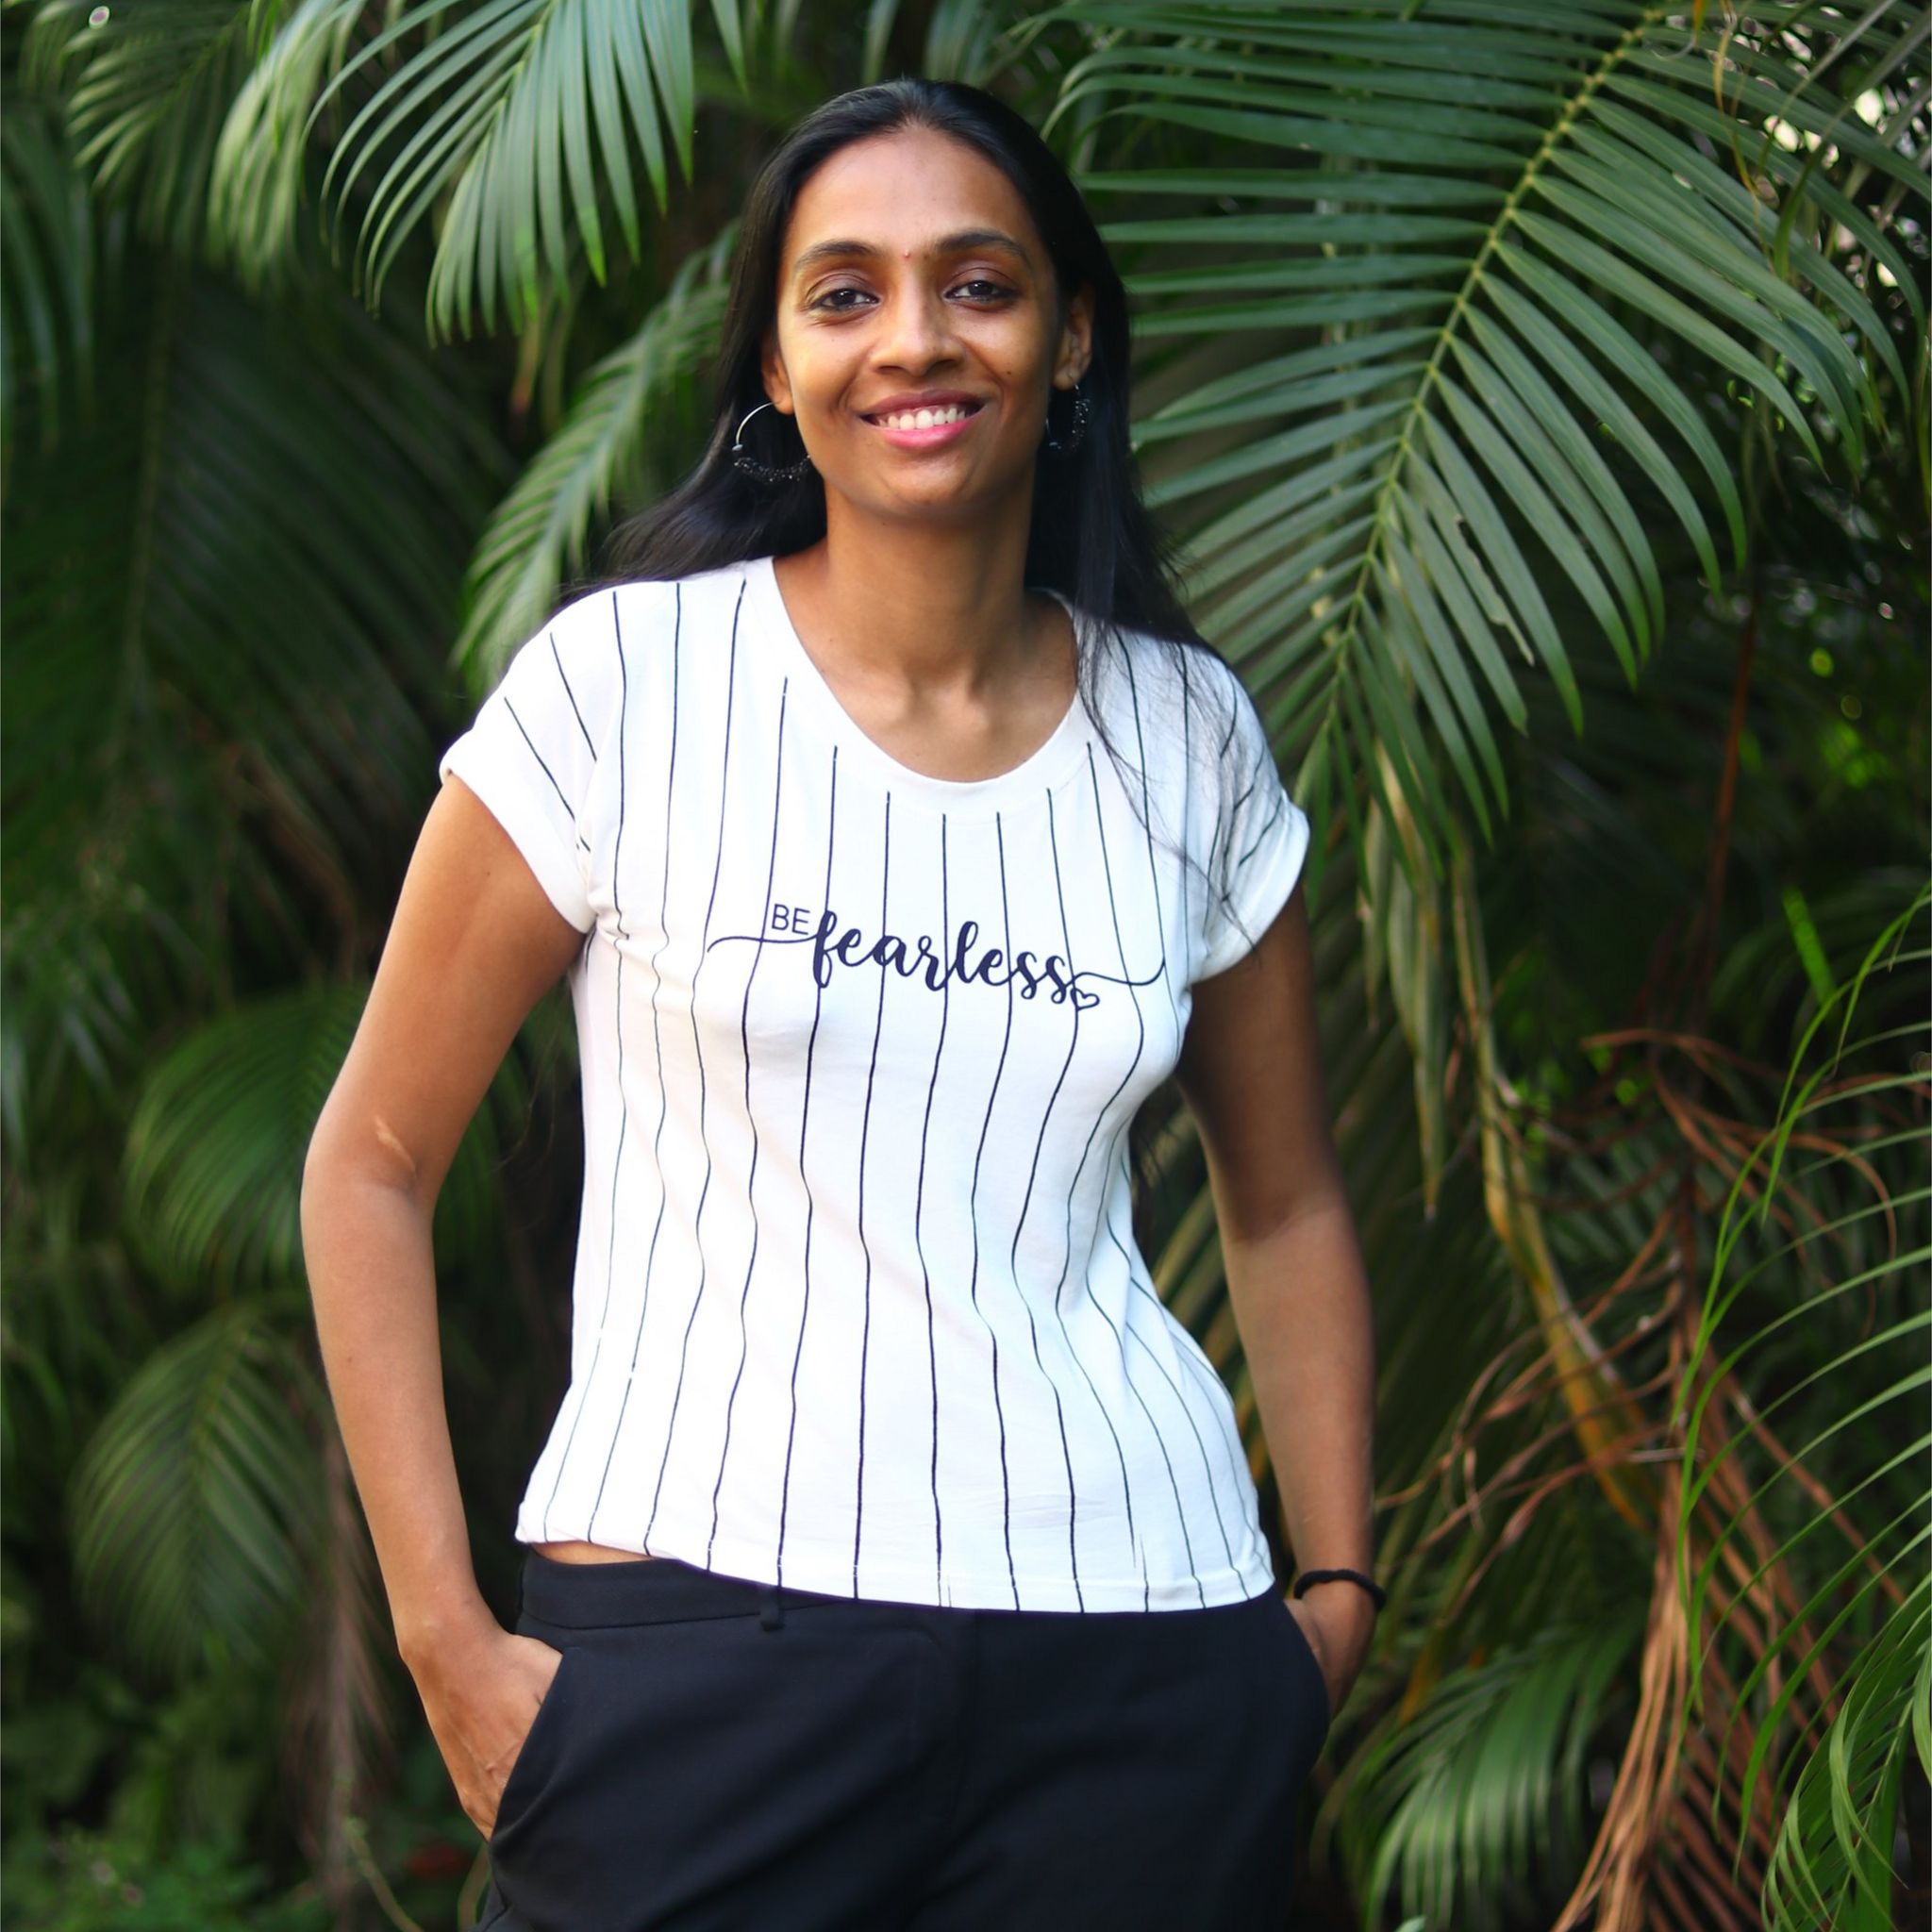 Pallavi standing by a tree with a t-shirt saying 'fearless' on it